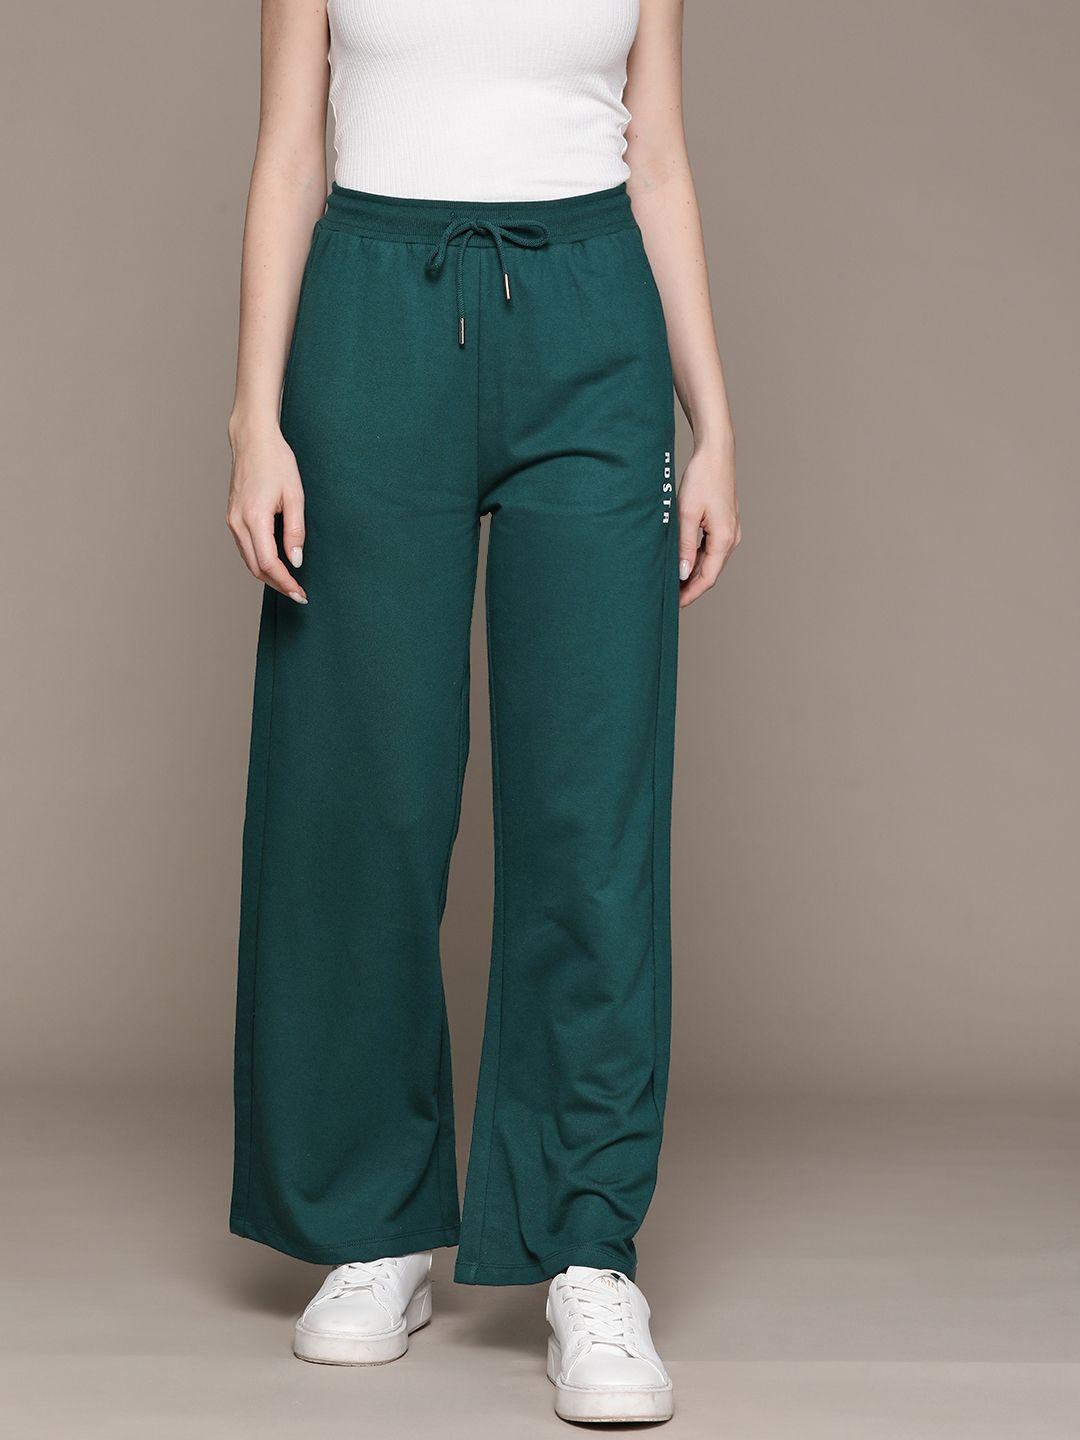 Roadster Solid Track Pants